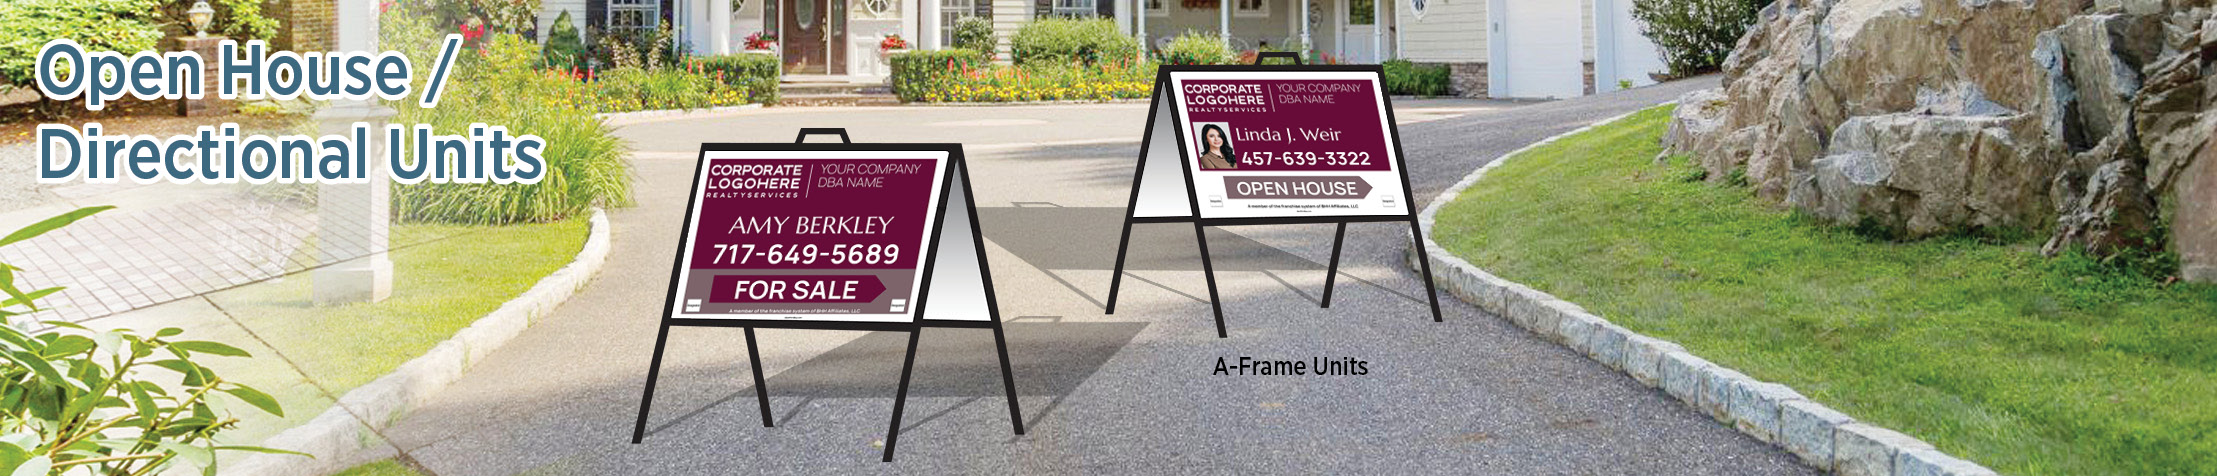 Berkshire Hathaway Real Estate Open House/Directional Units - BHHS approved vendor directional real estate signs | BestPrintBuy.com